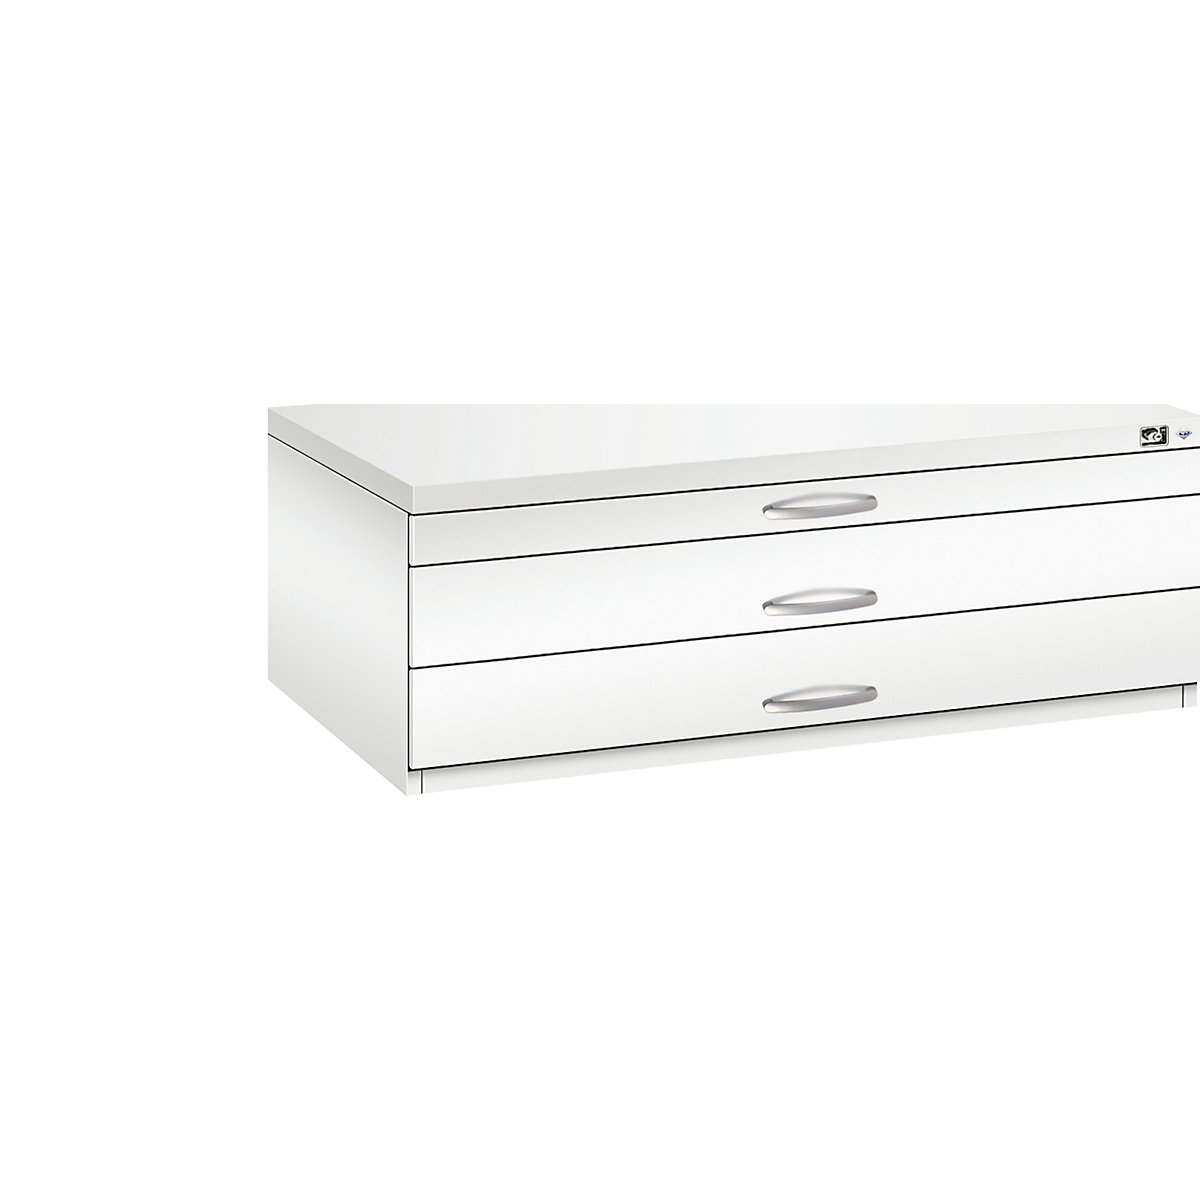 Drawing cabinet – C+P, A1, 3 drawers, height 420 mm, traffic white-11